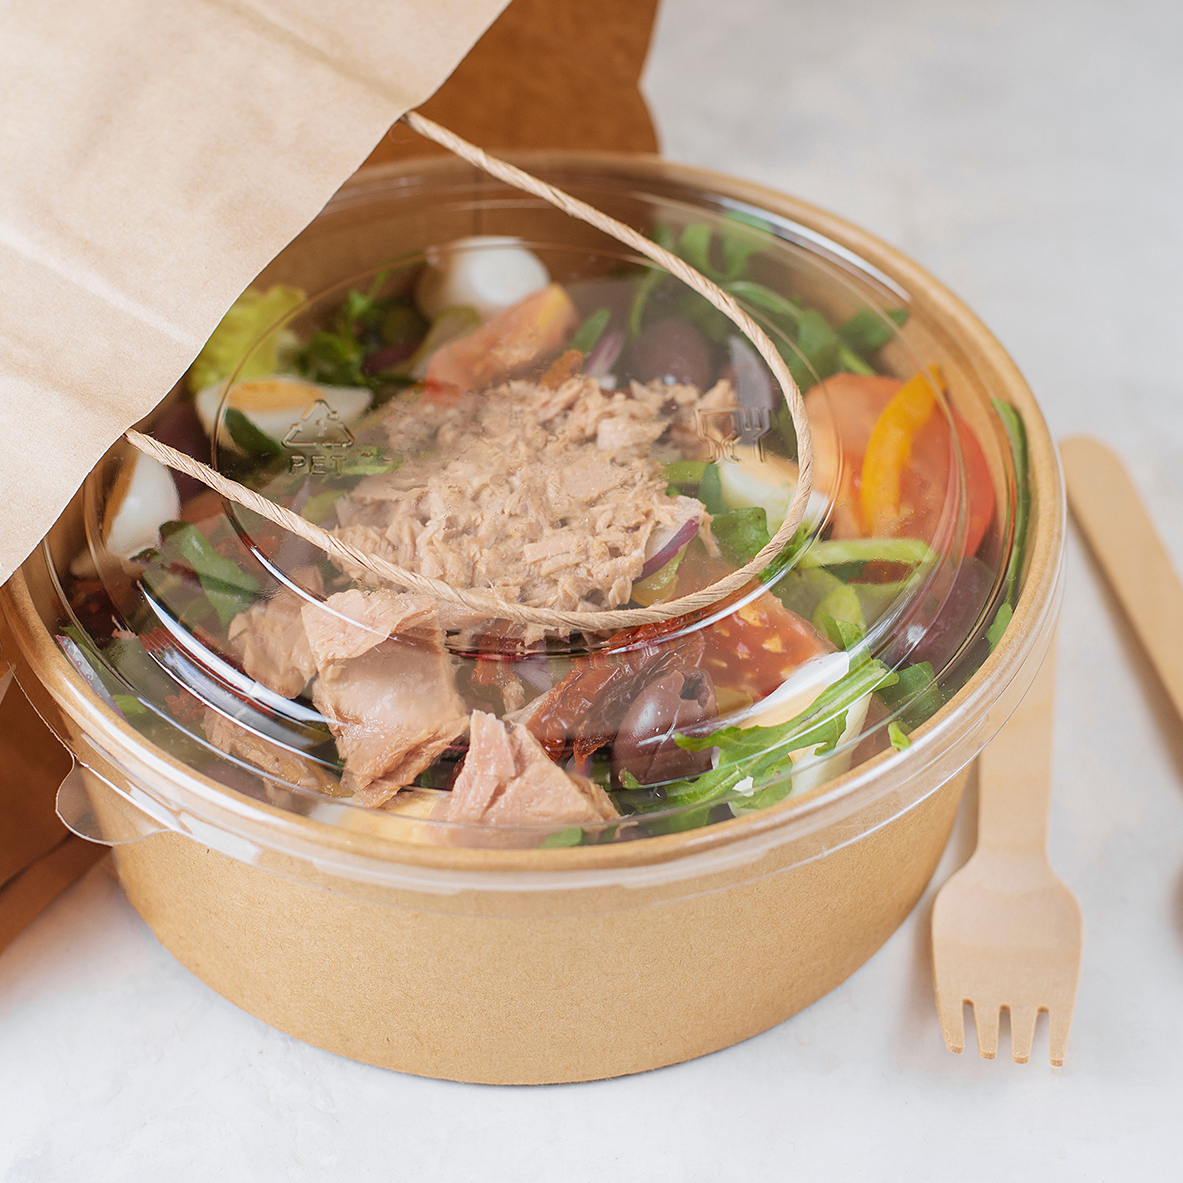 Fish diet salad with tuna, tomatoes, arugula on light background. Healthy vegetarian lunch. Concept eco restaurant delivery, environment protection. Take away food in brown paper craft plate.